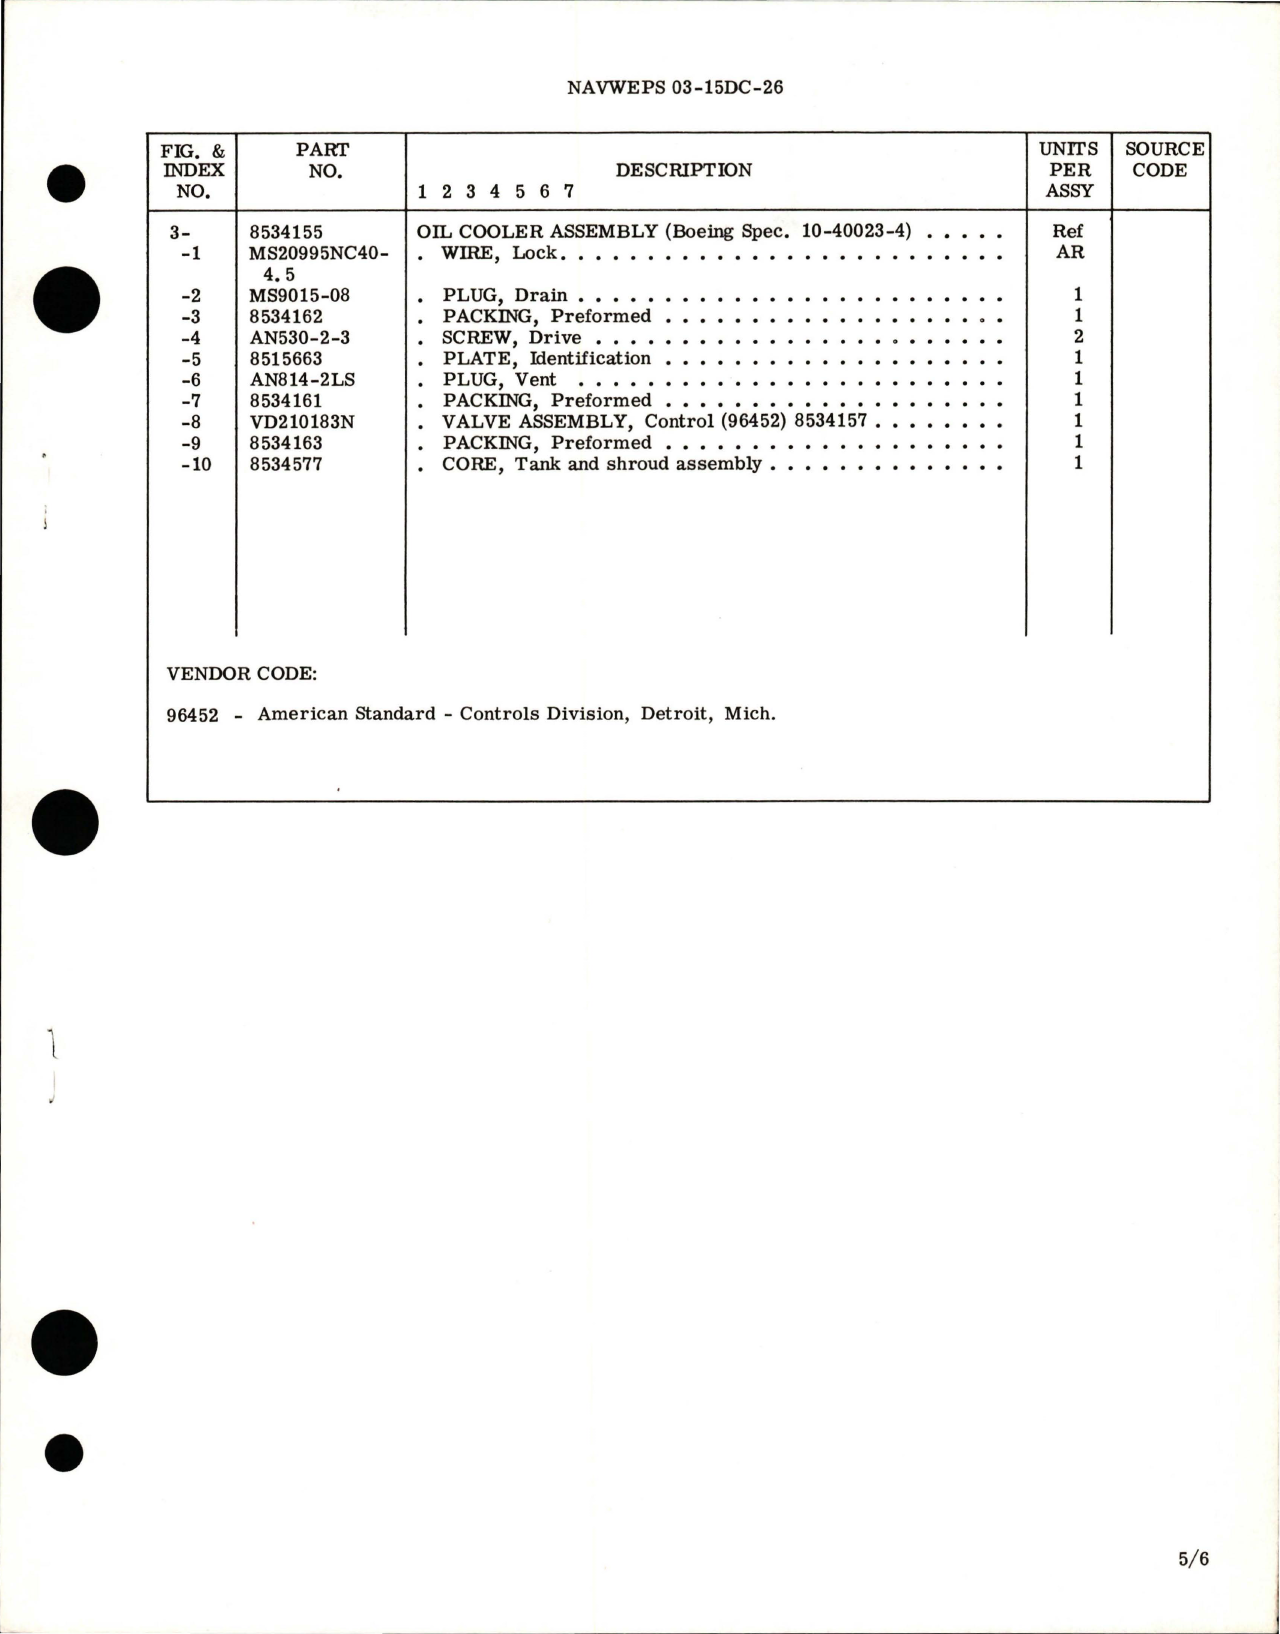 Sample page 5 from AirCorps Library document: Overhaul Instructions with Parts Breakdown for Oil Cooler Assembly - Model AP12AN14-02 - Part 8534155